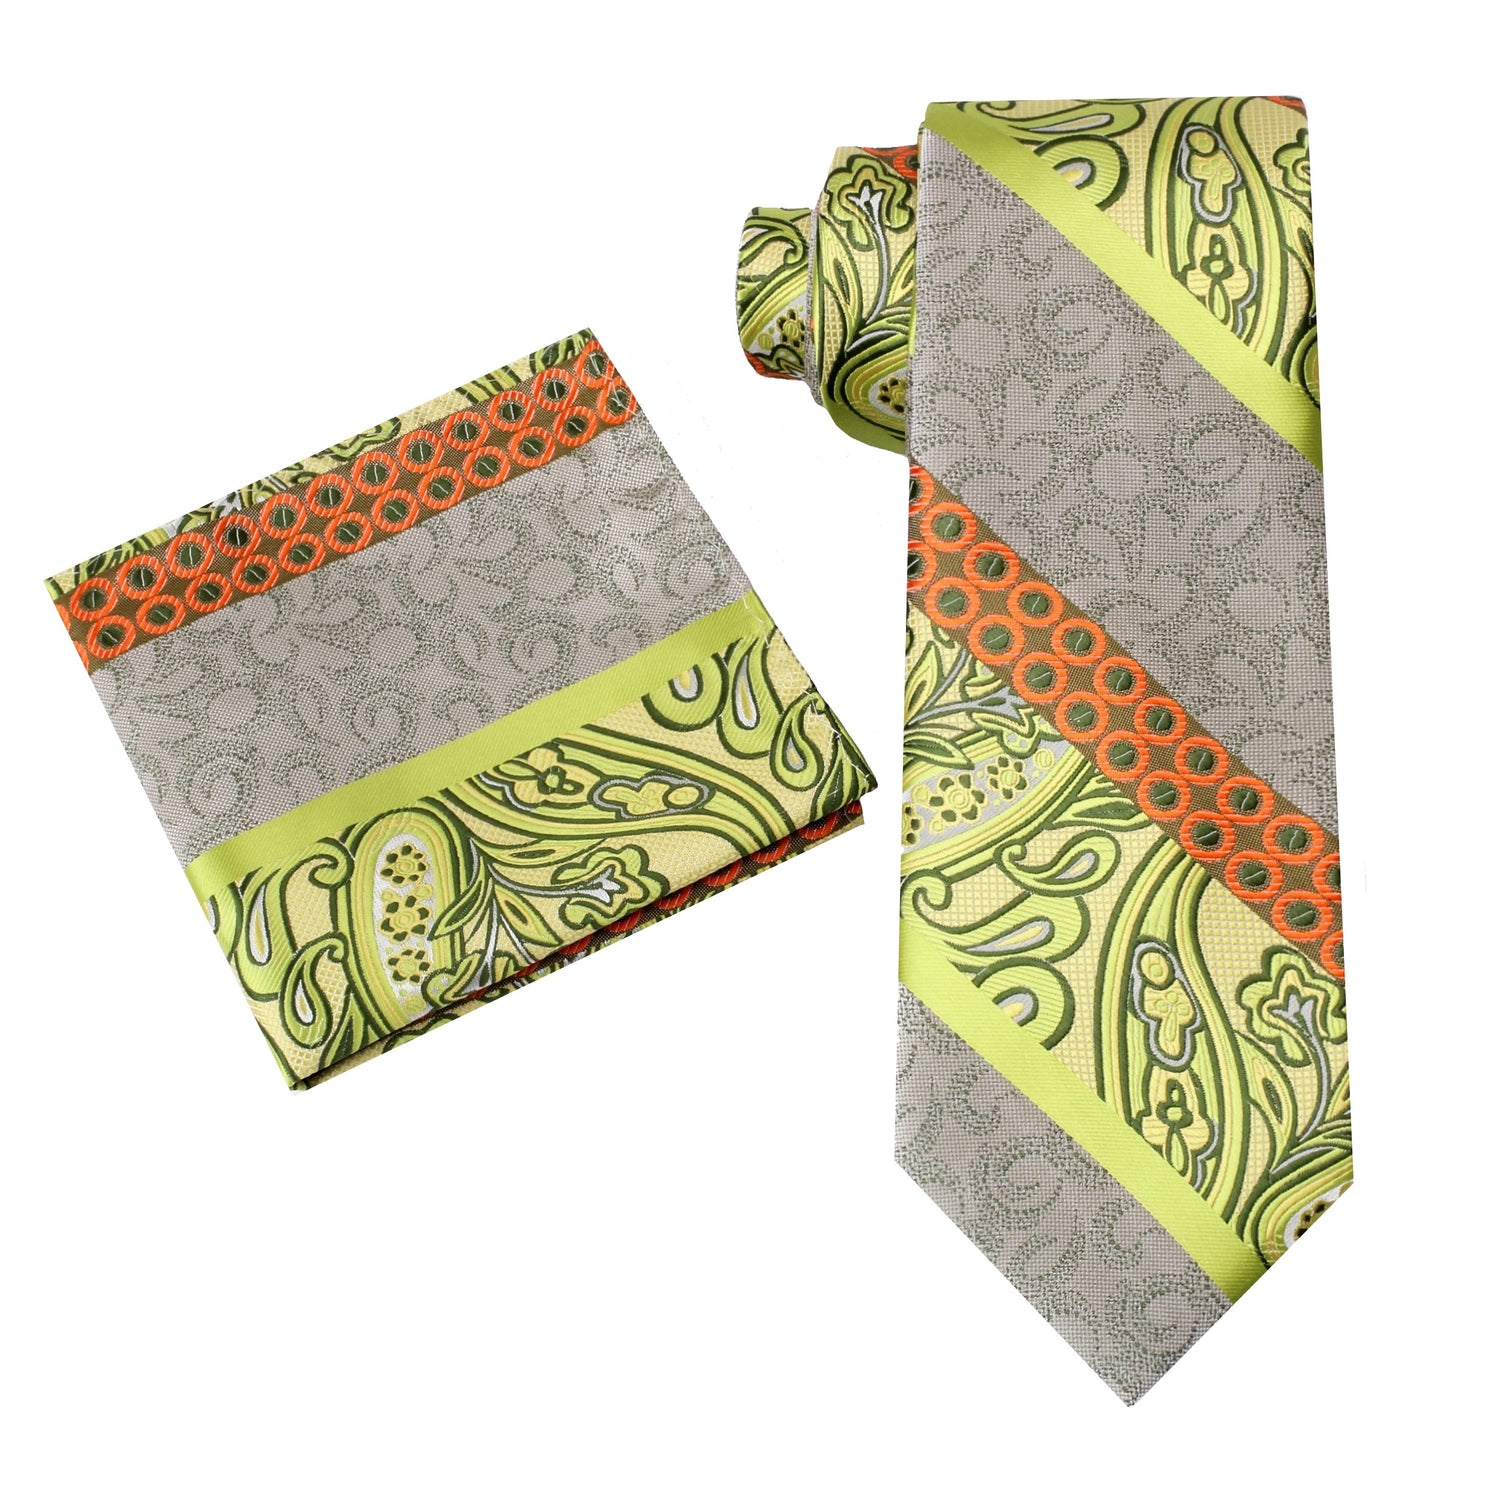 Alt View: Yellow and Orange Abstract Paisley Tie and Pocket Square